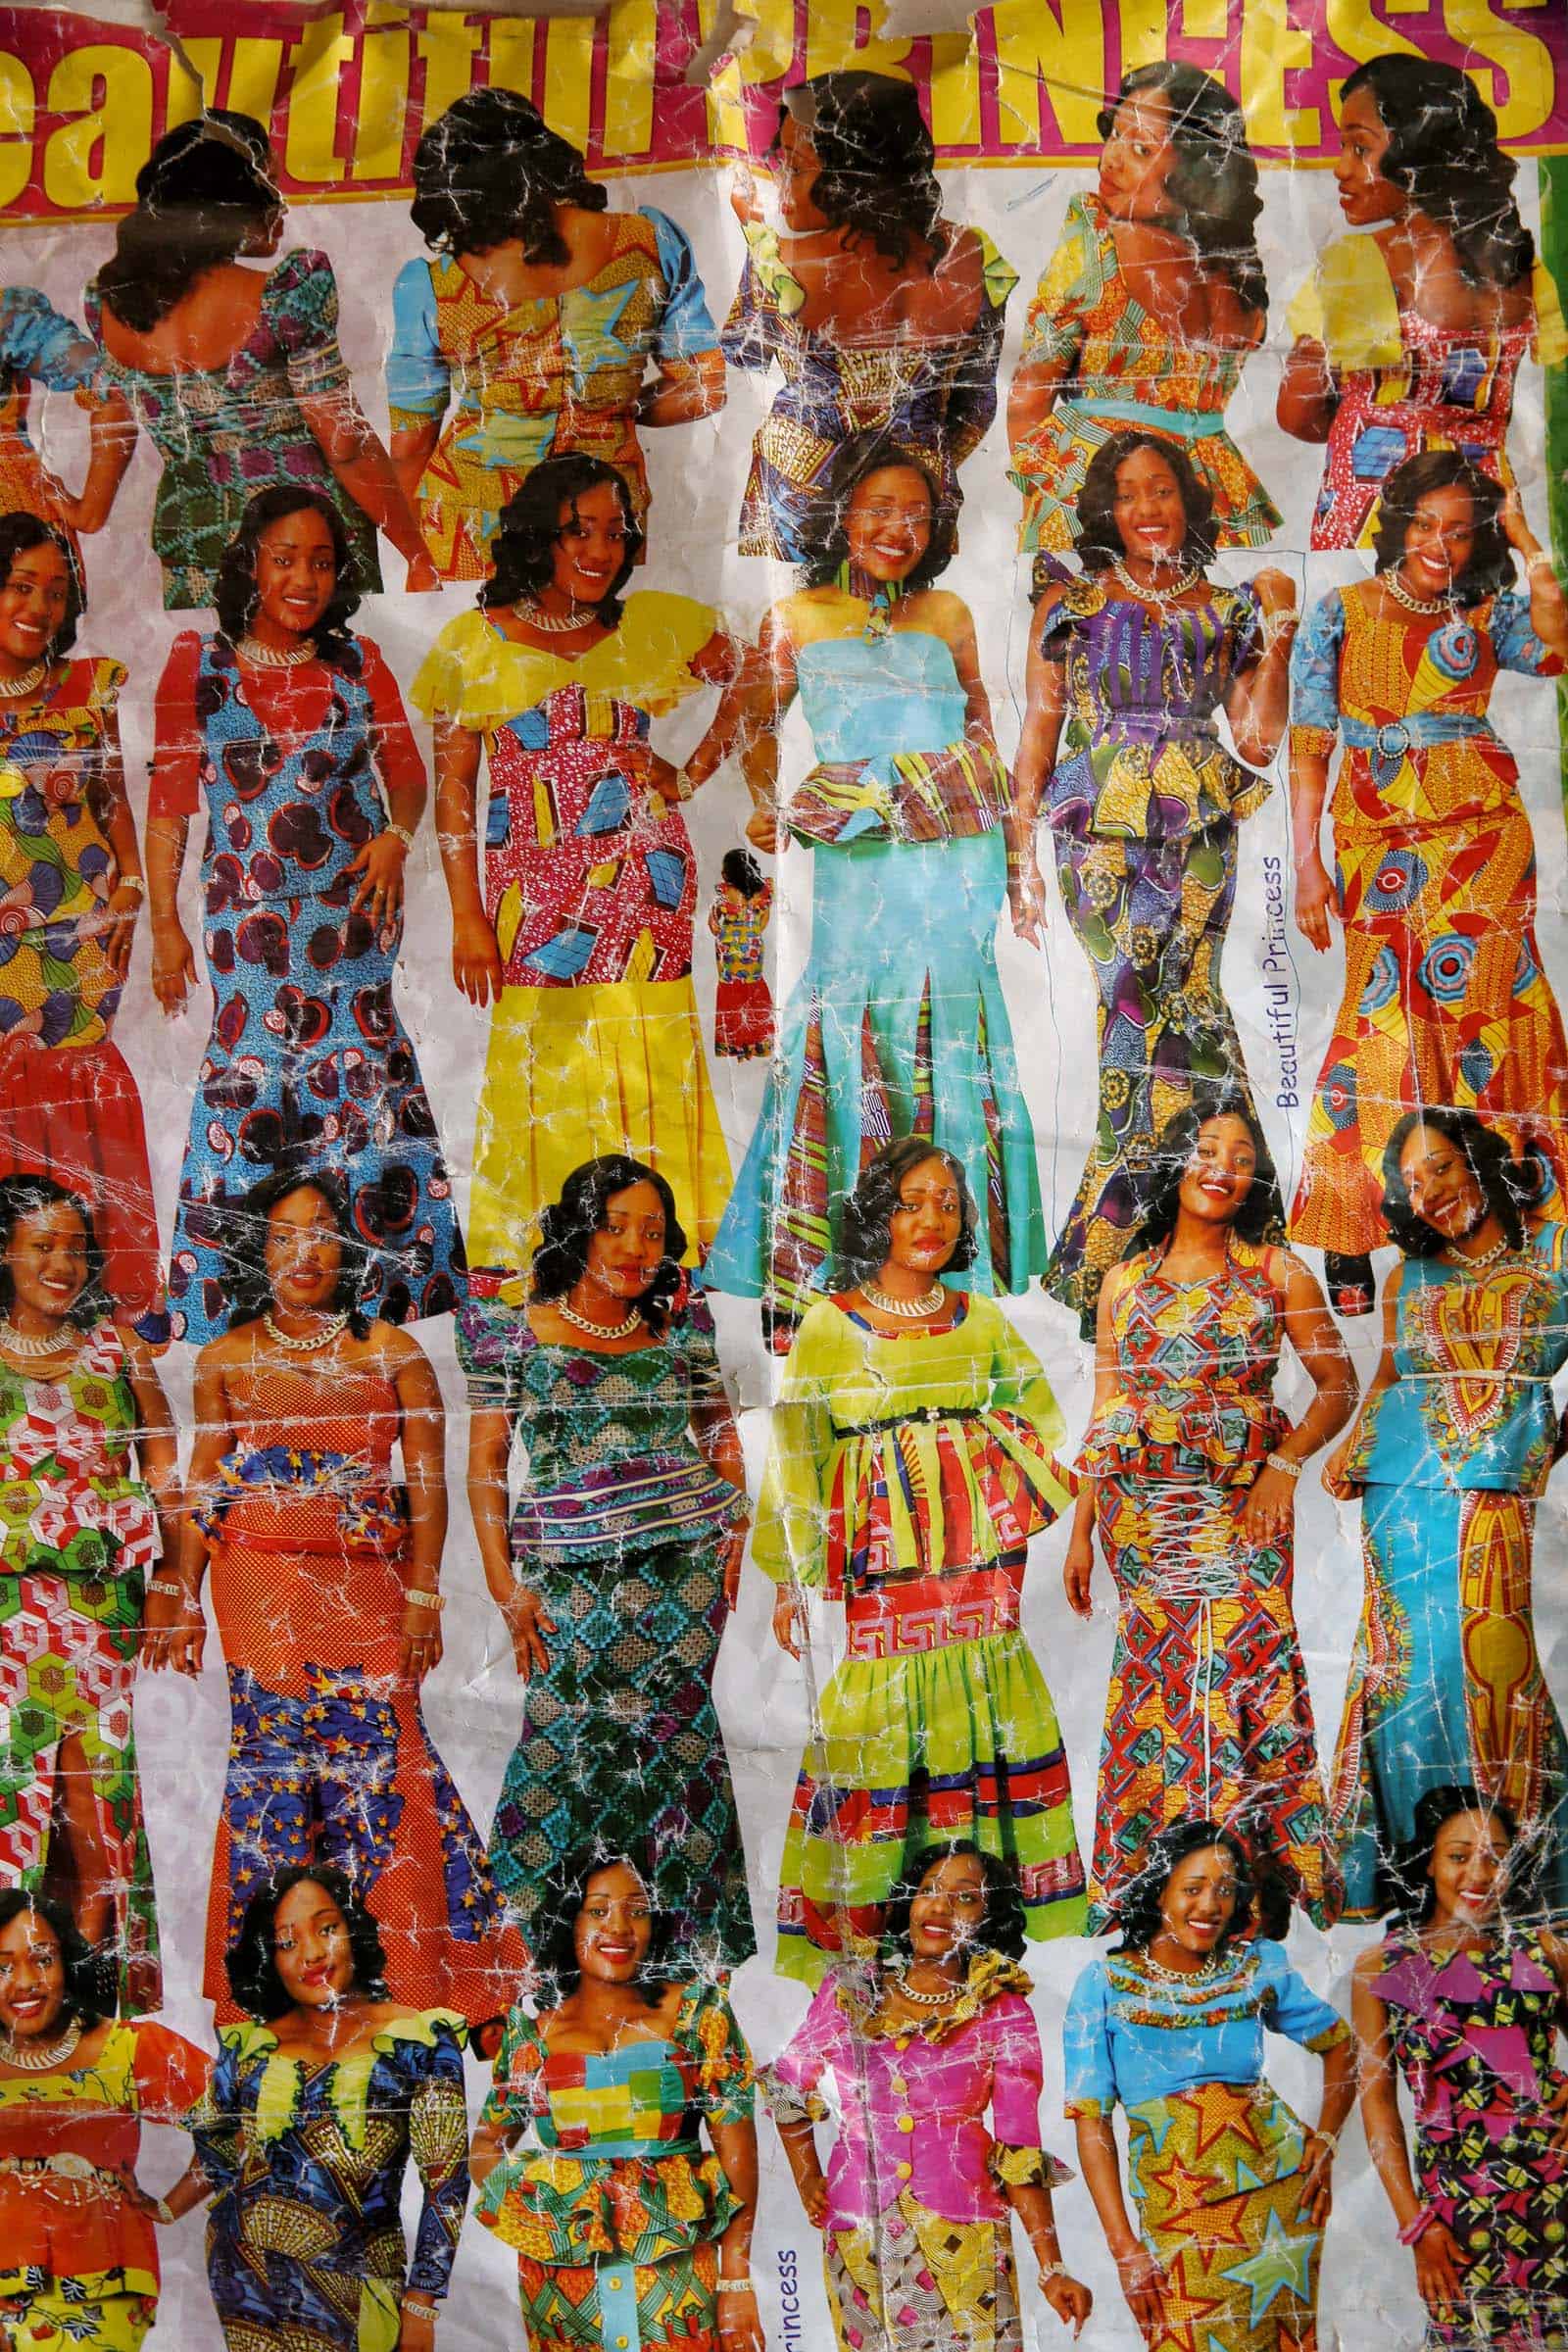 A selection of African fashions to choose from at Bea's seamstress shop.